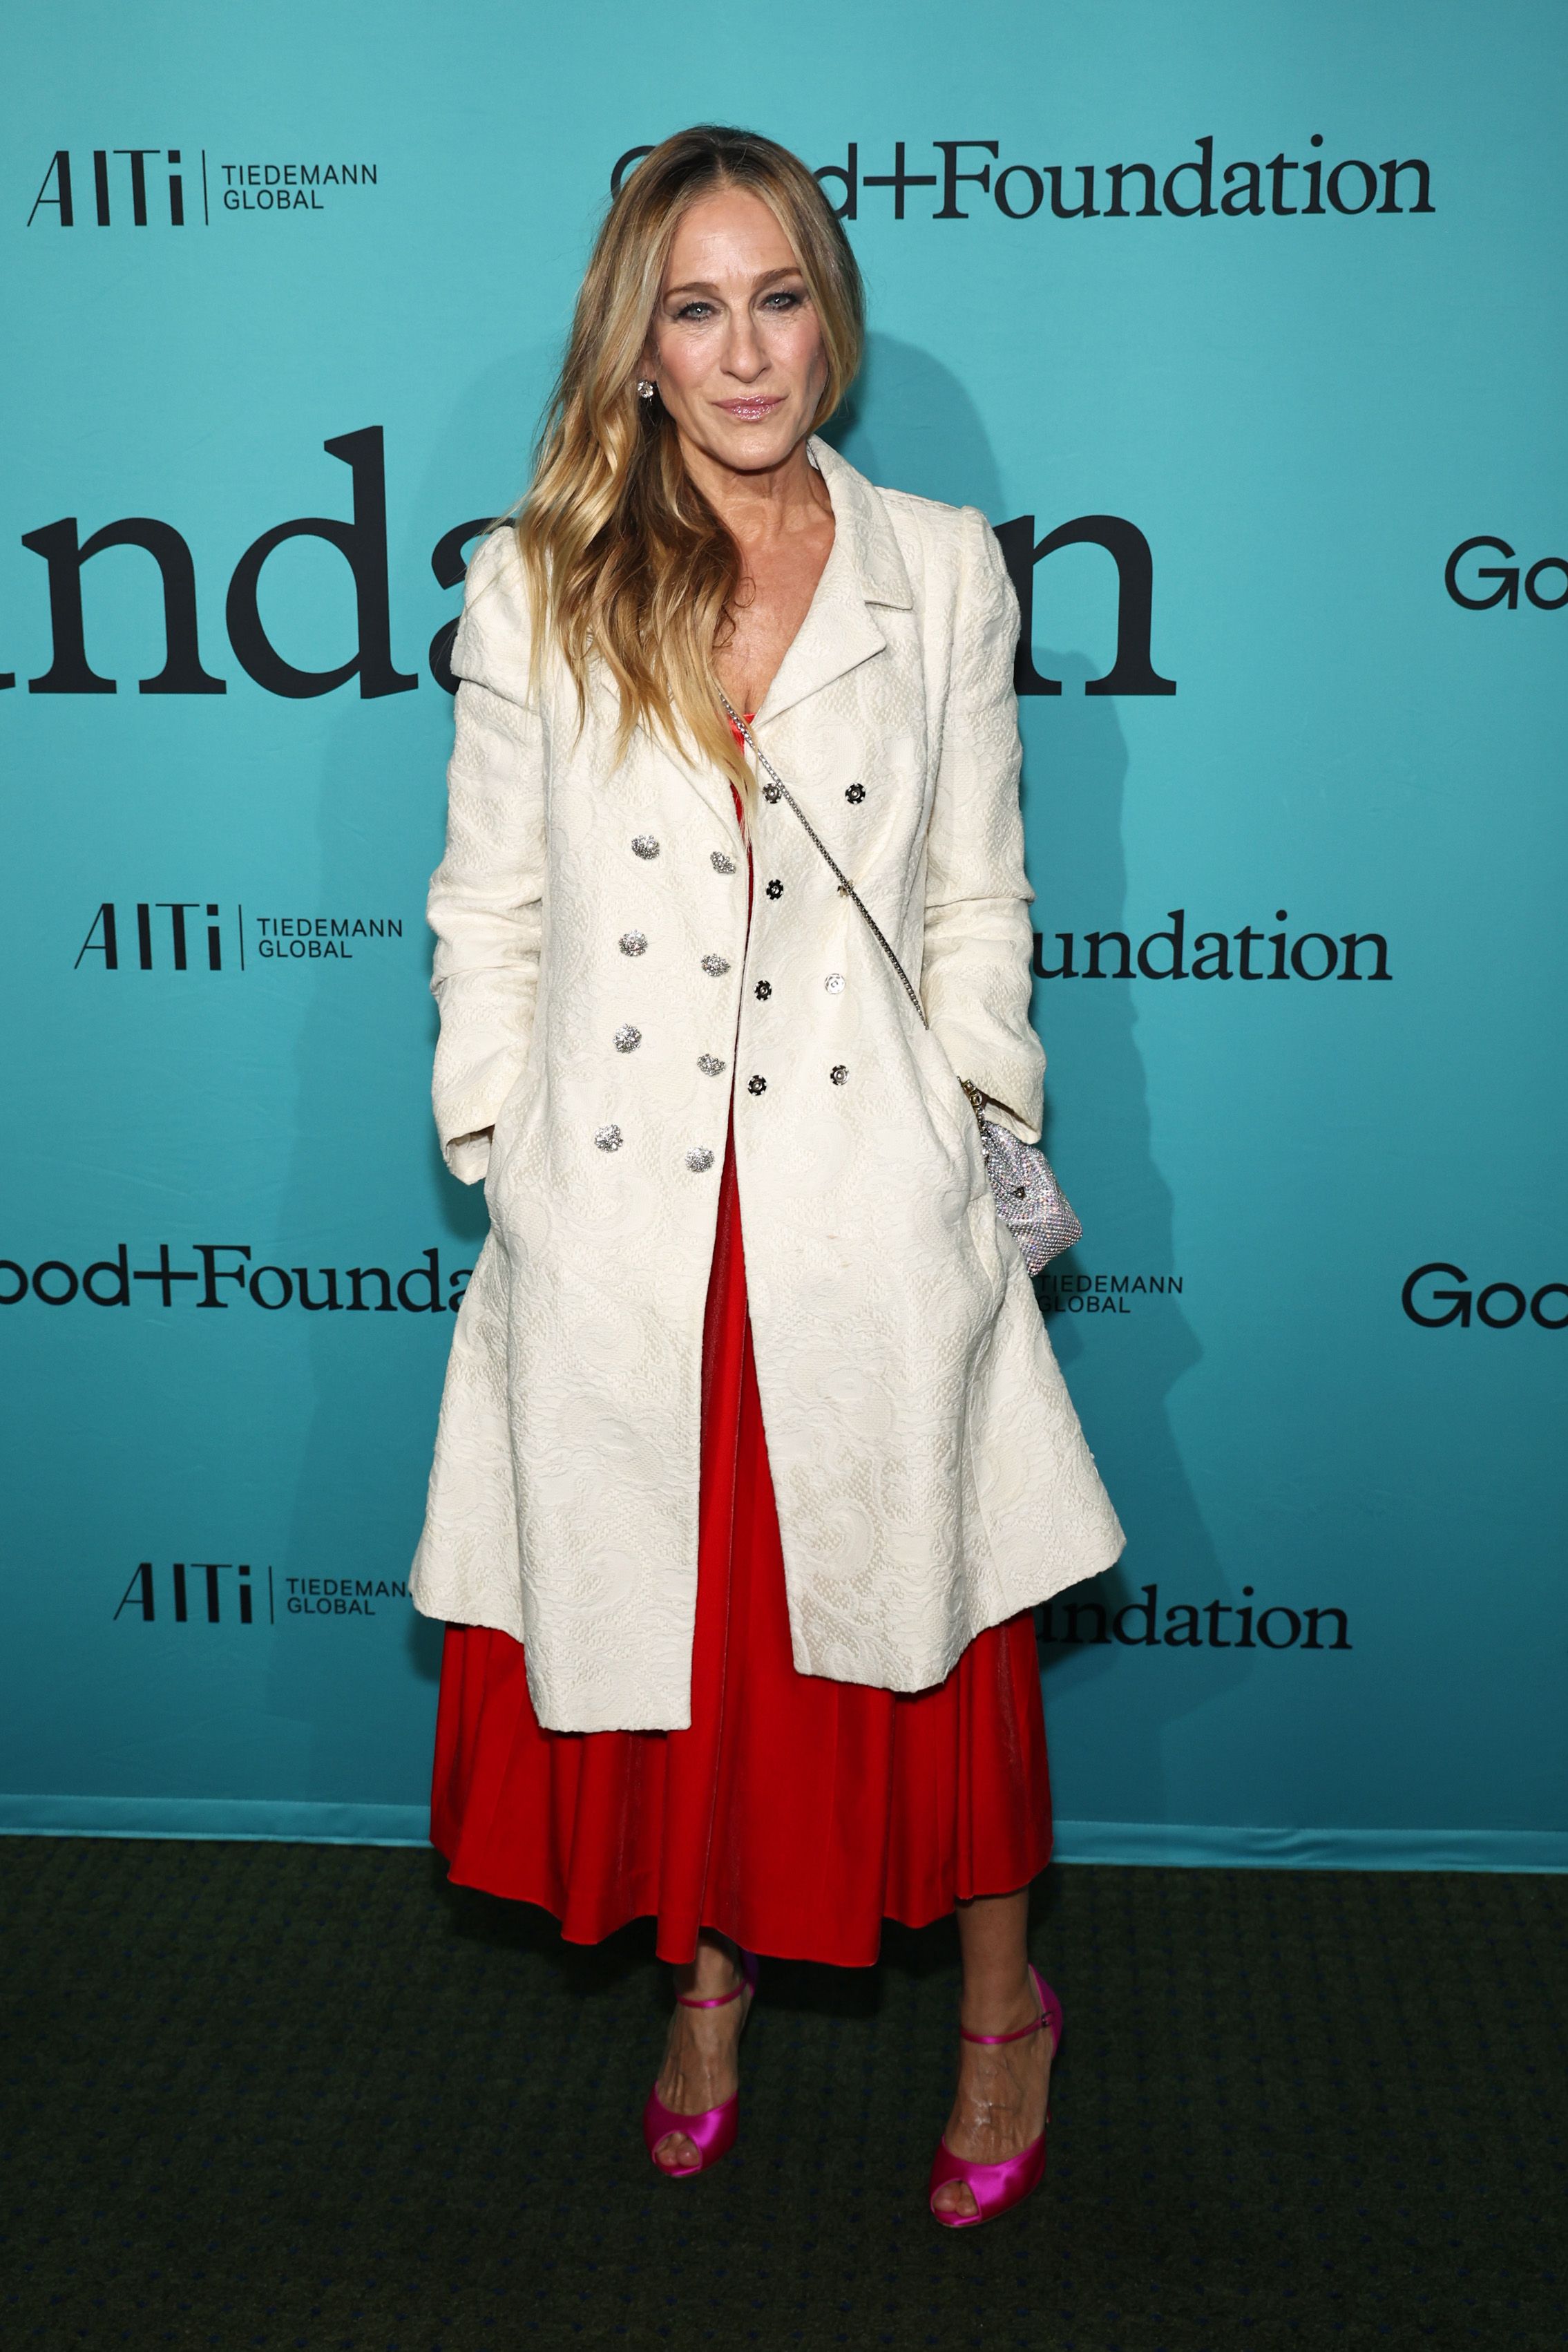 Sarah Jessica Parker steps out in beautiful white coat